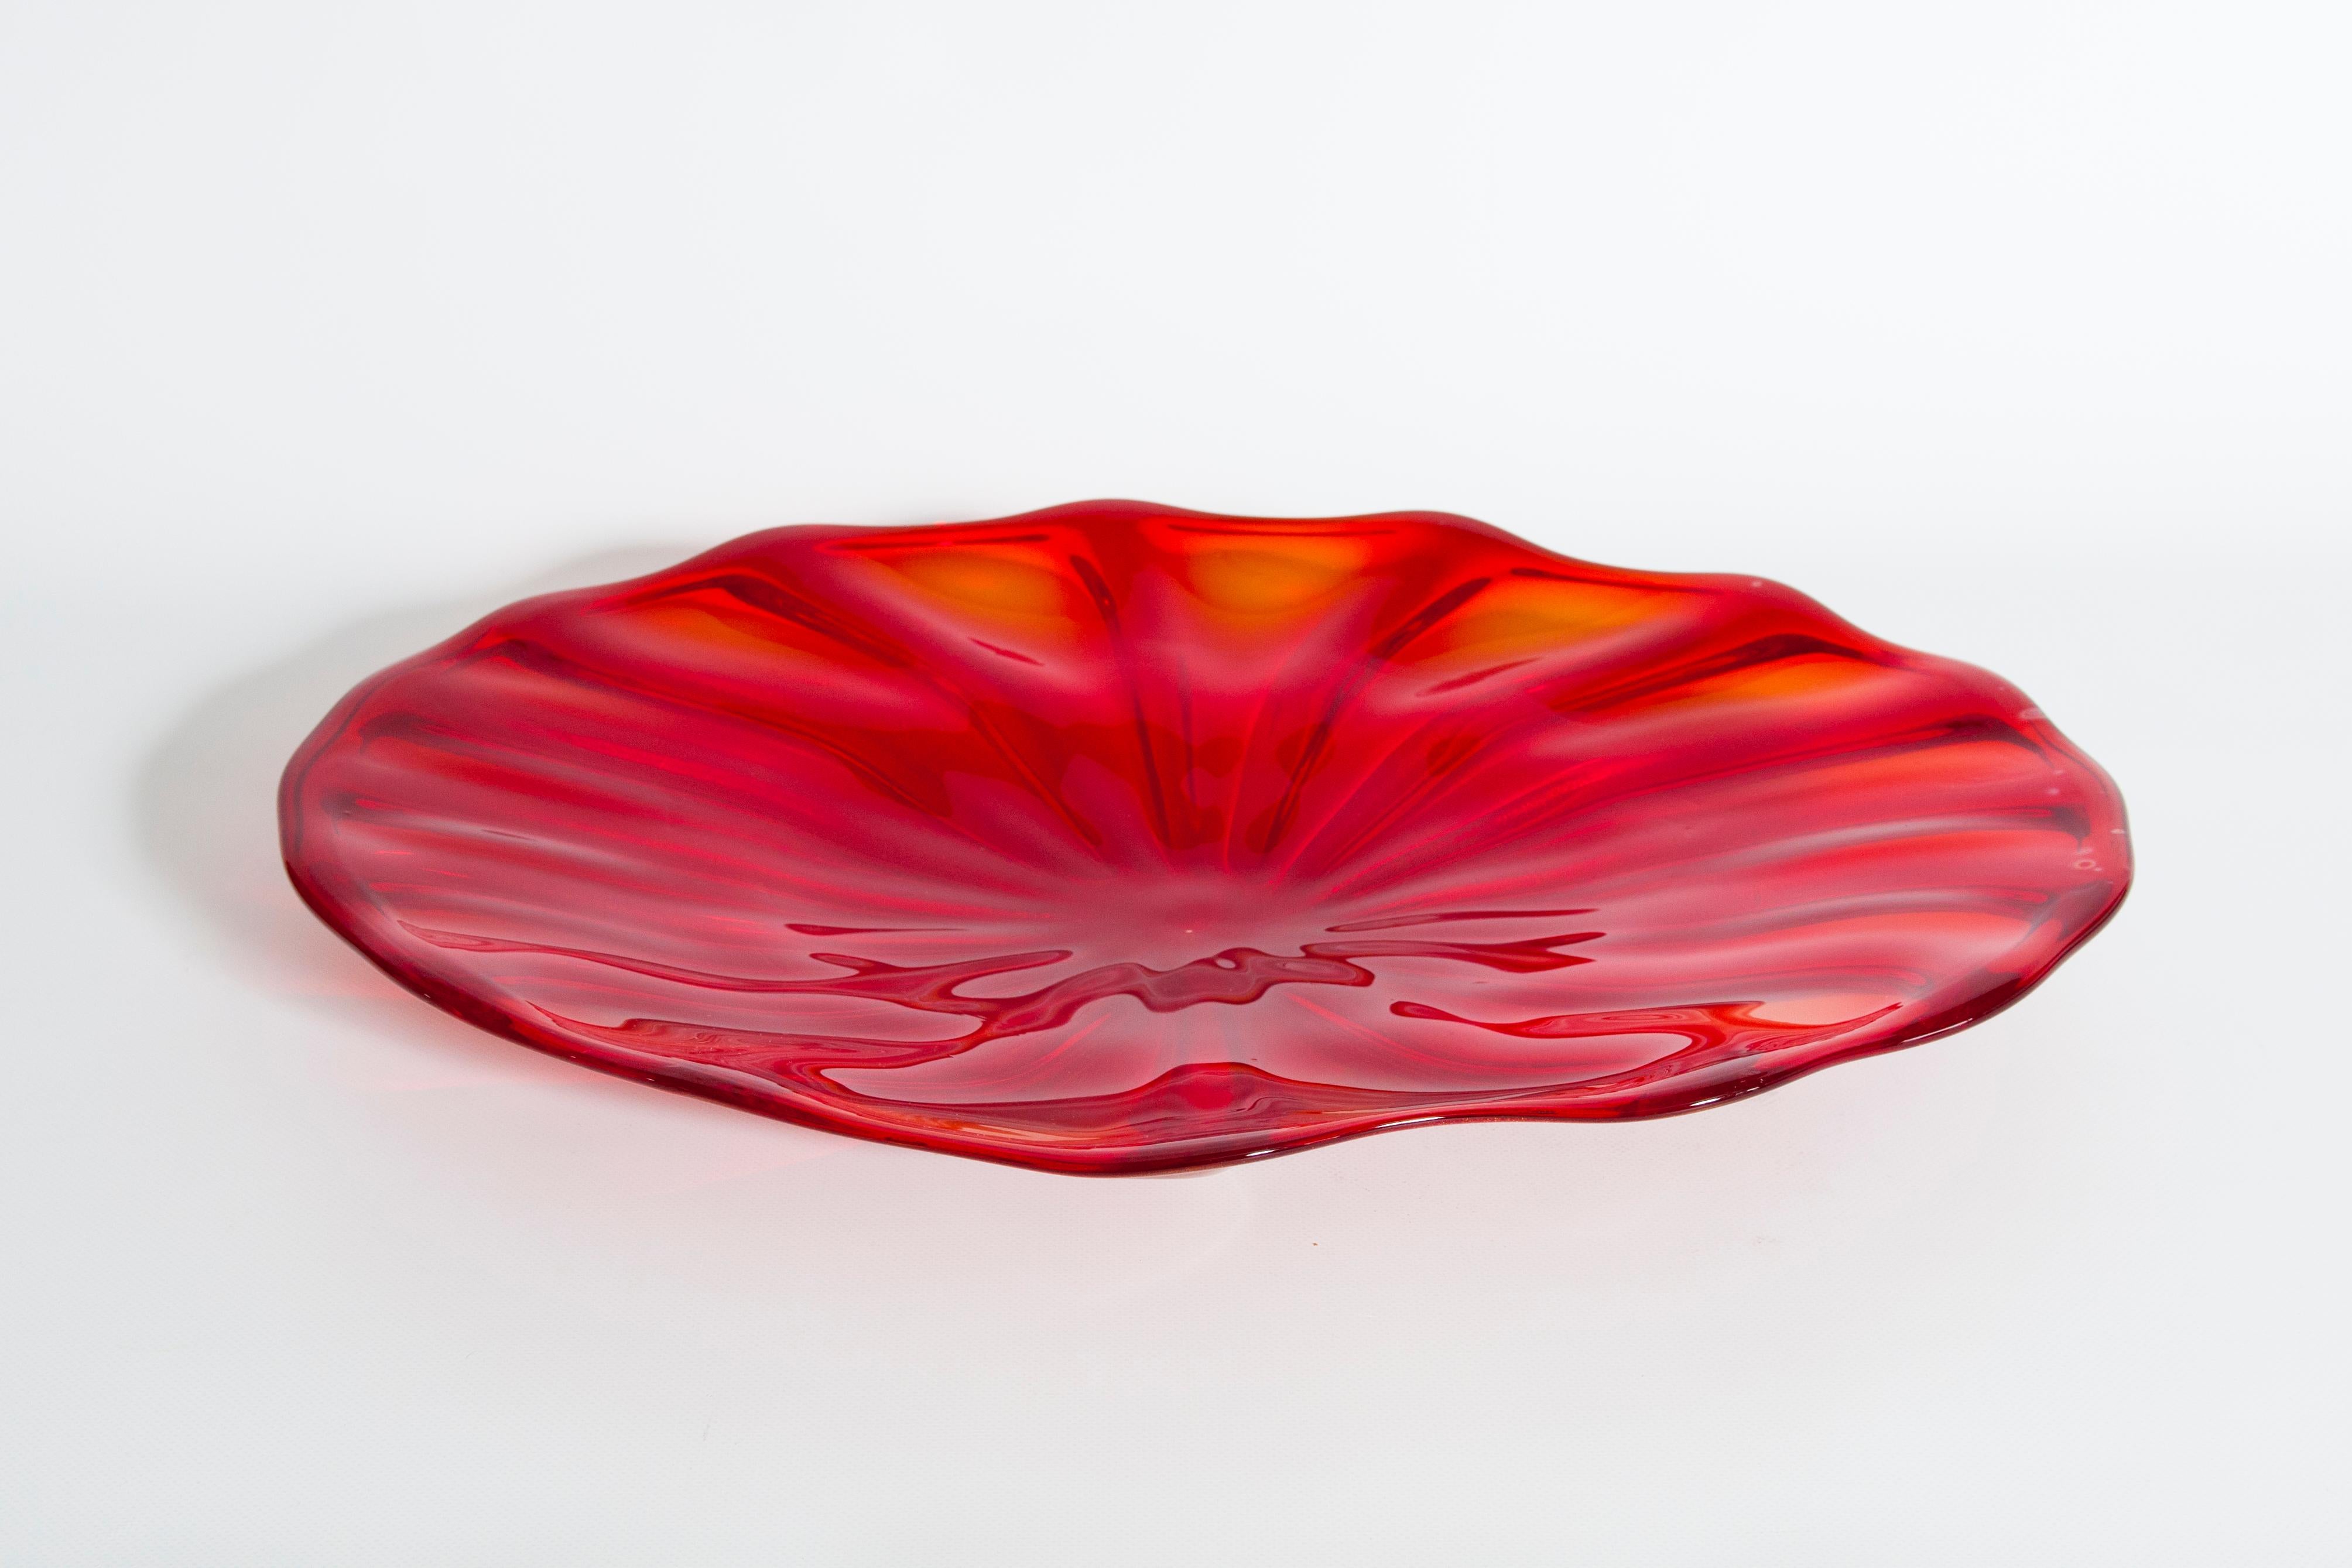 Modern Italian Venetian Red Murano Glass Centerpiece with Submerged Gold, 2000s For Sale